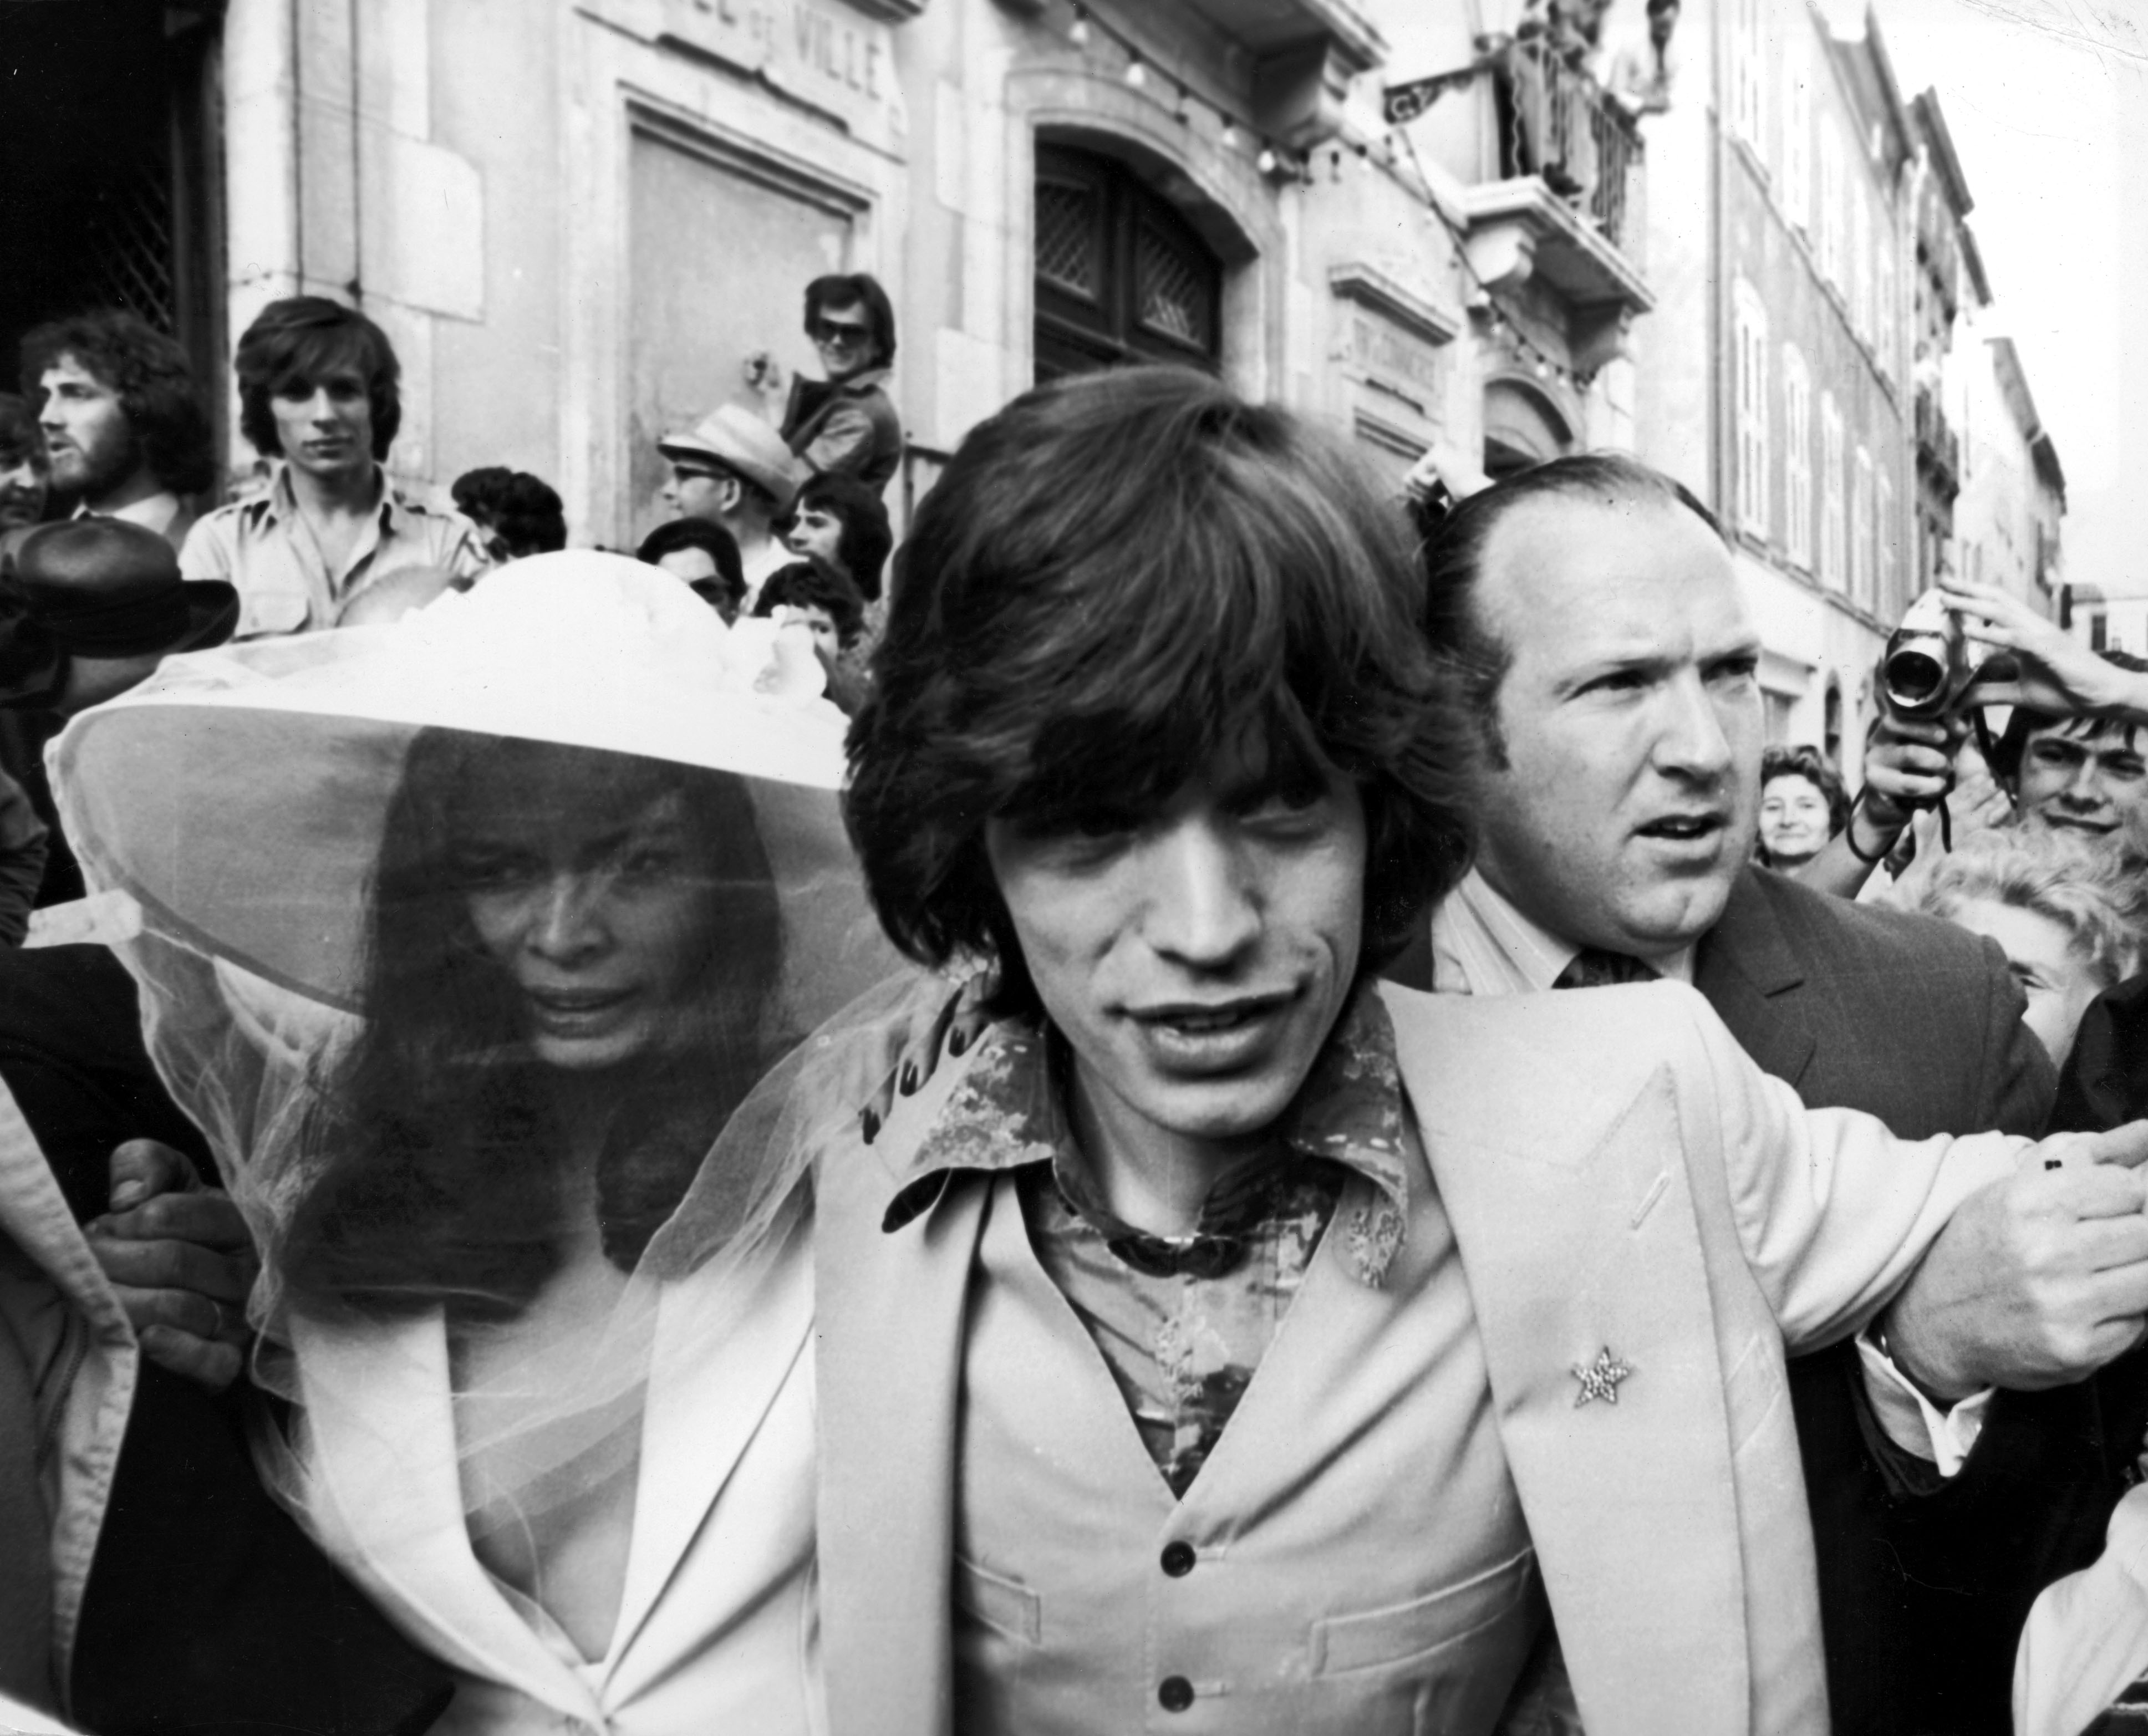 Mick Jagger and Bianca Pérez Morene de Macías on their wedding day, May 12, 1971. Both moved to the Costa Azul while recording Exile on Main Street, one of the Rolling Stones' iconic albums (Photo by Express/Express/GettyImages )